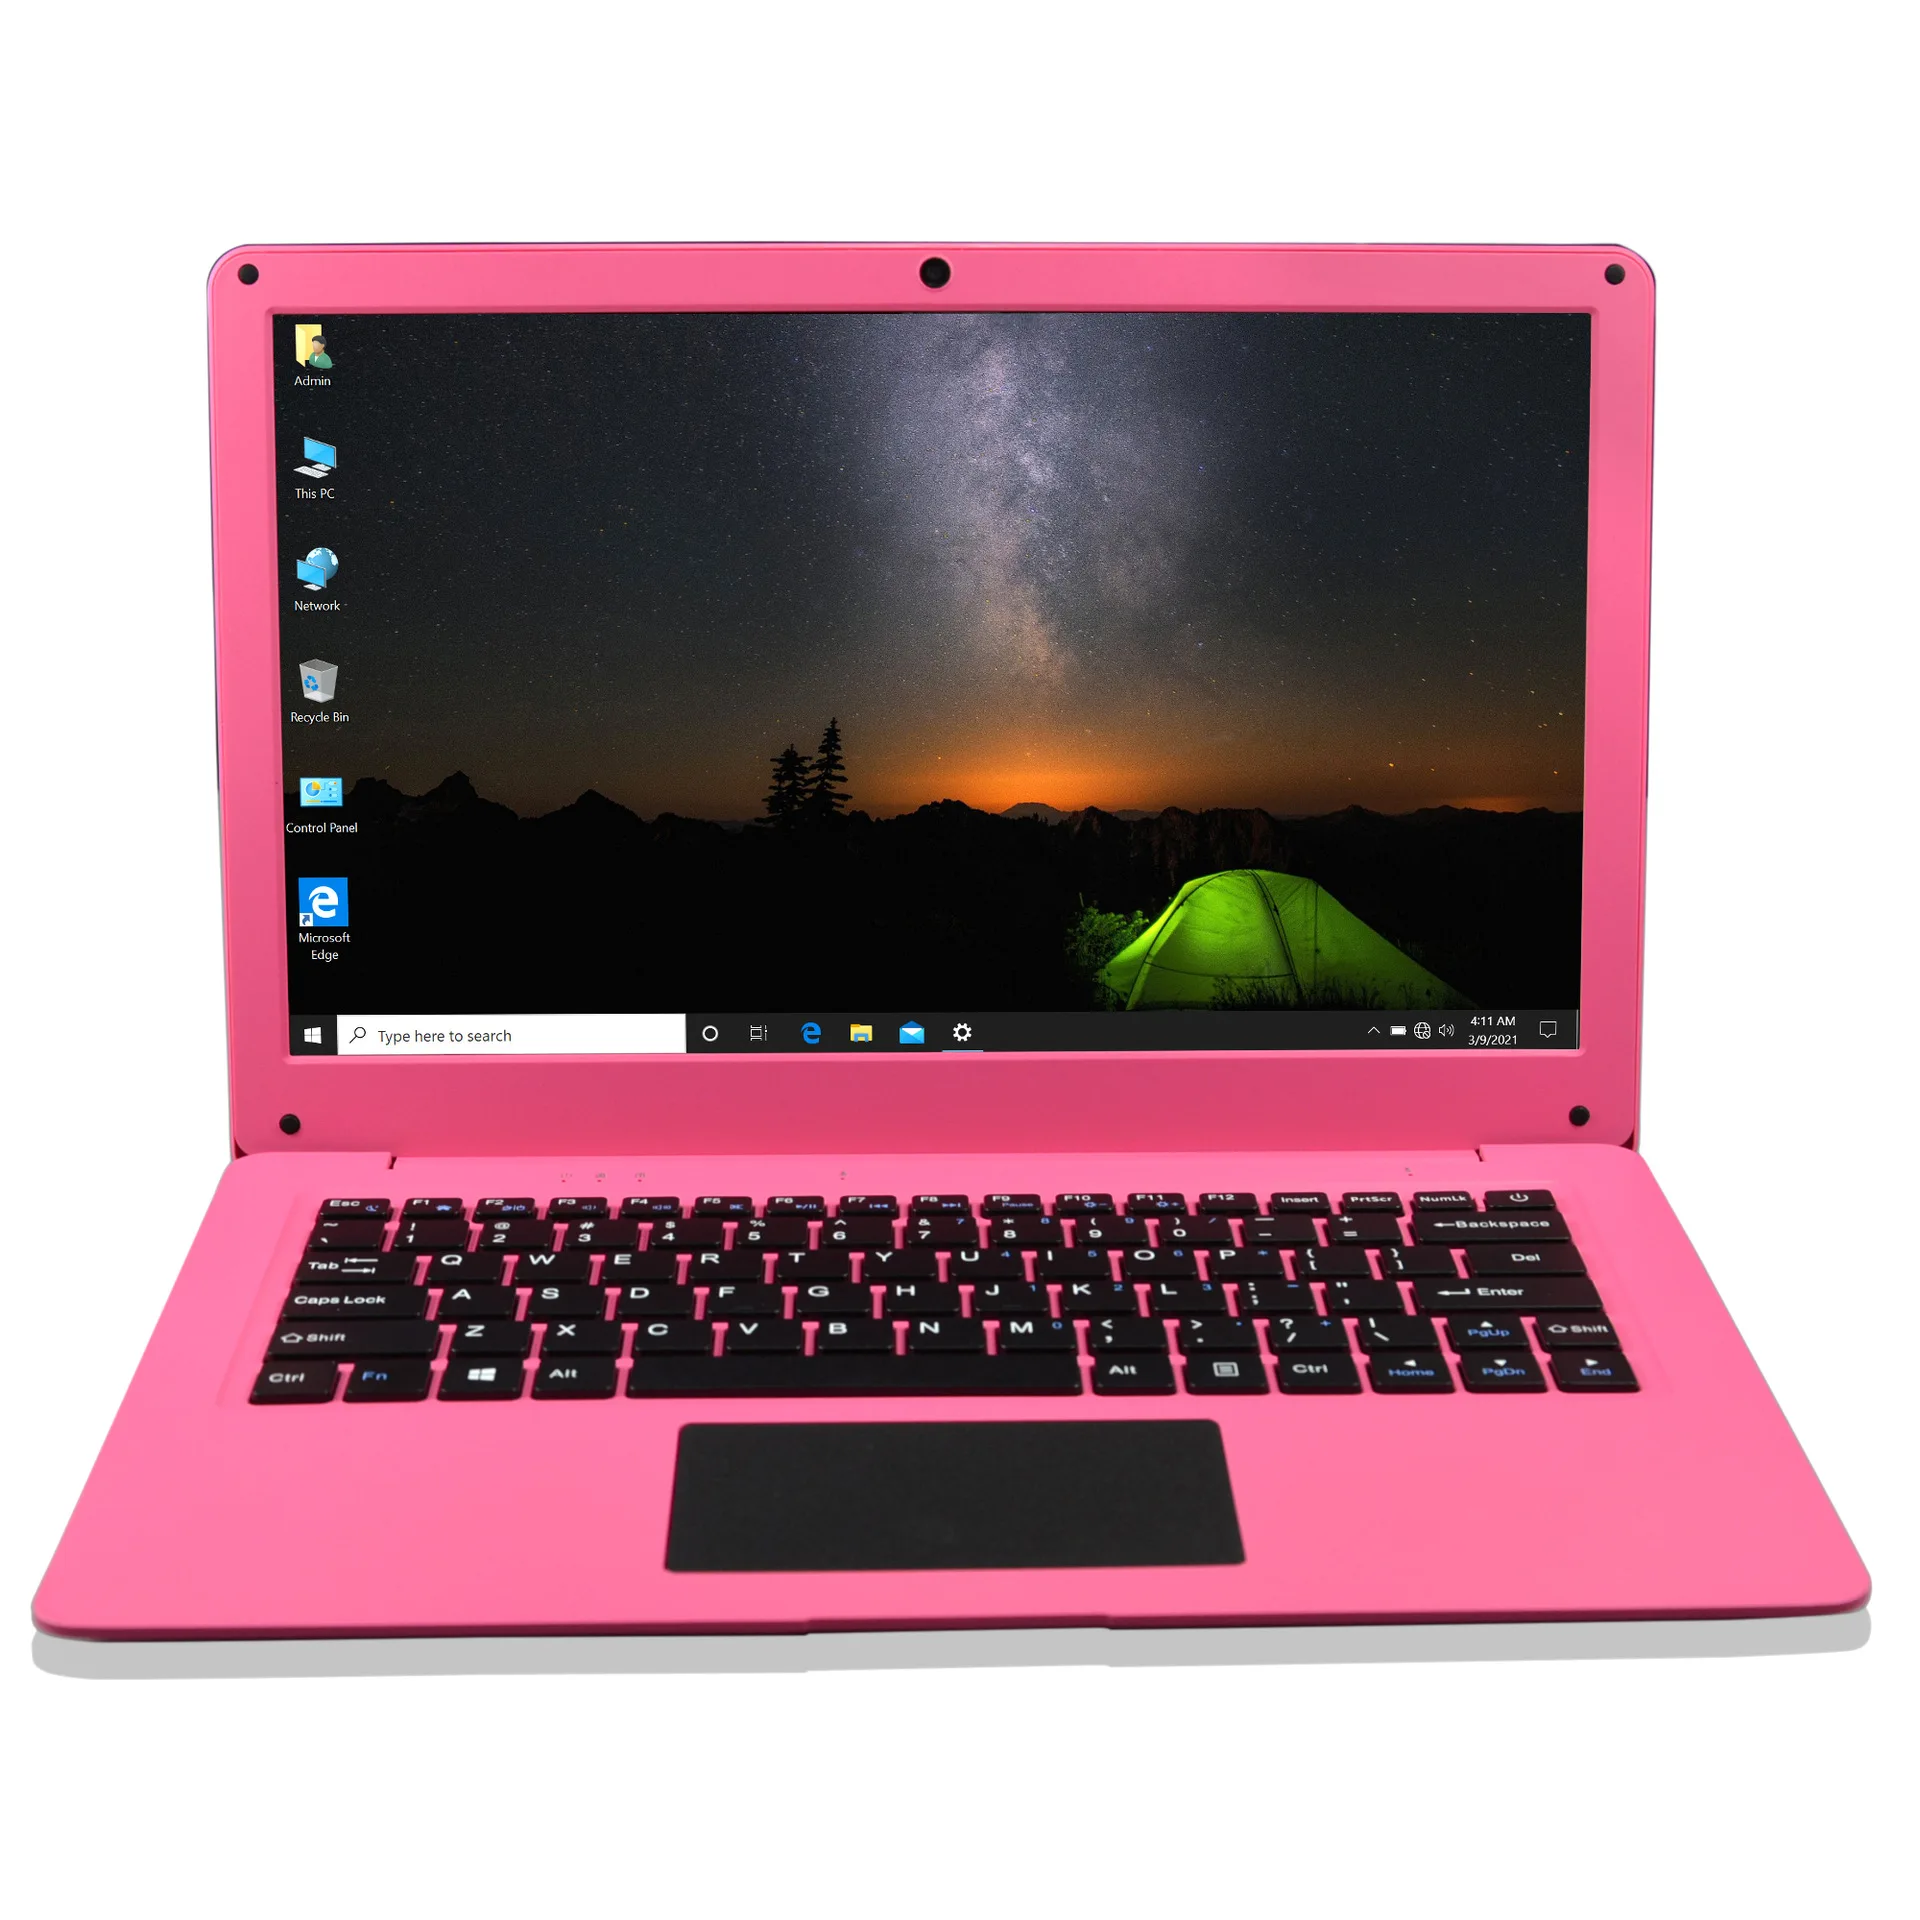 

Students Laptop Win 10 N3350 4GB Ram 64GB 12 inch Computadors Sales of Laptops Computer Cheap, Pink